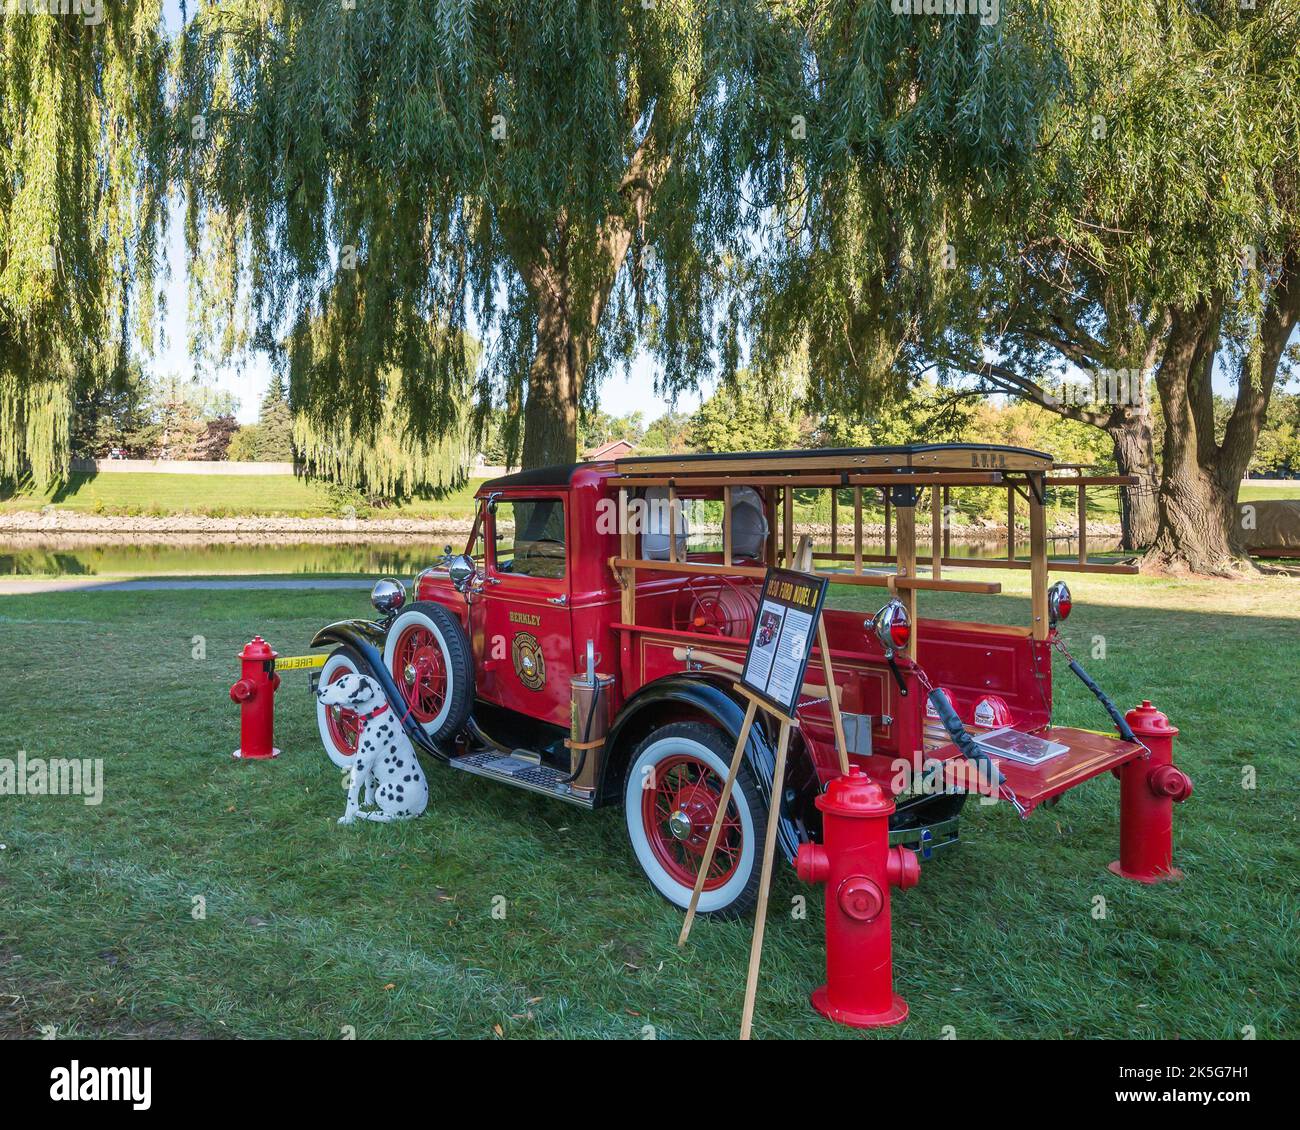 FRANKENMUTH, MI/USA - SEPTEMBER 13, 2015: A 1930 Ford Model A fire truck, Frankenmuth Auto Fest, Heritage Park. Stock Photo